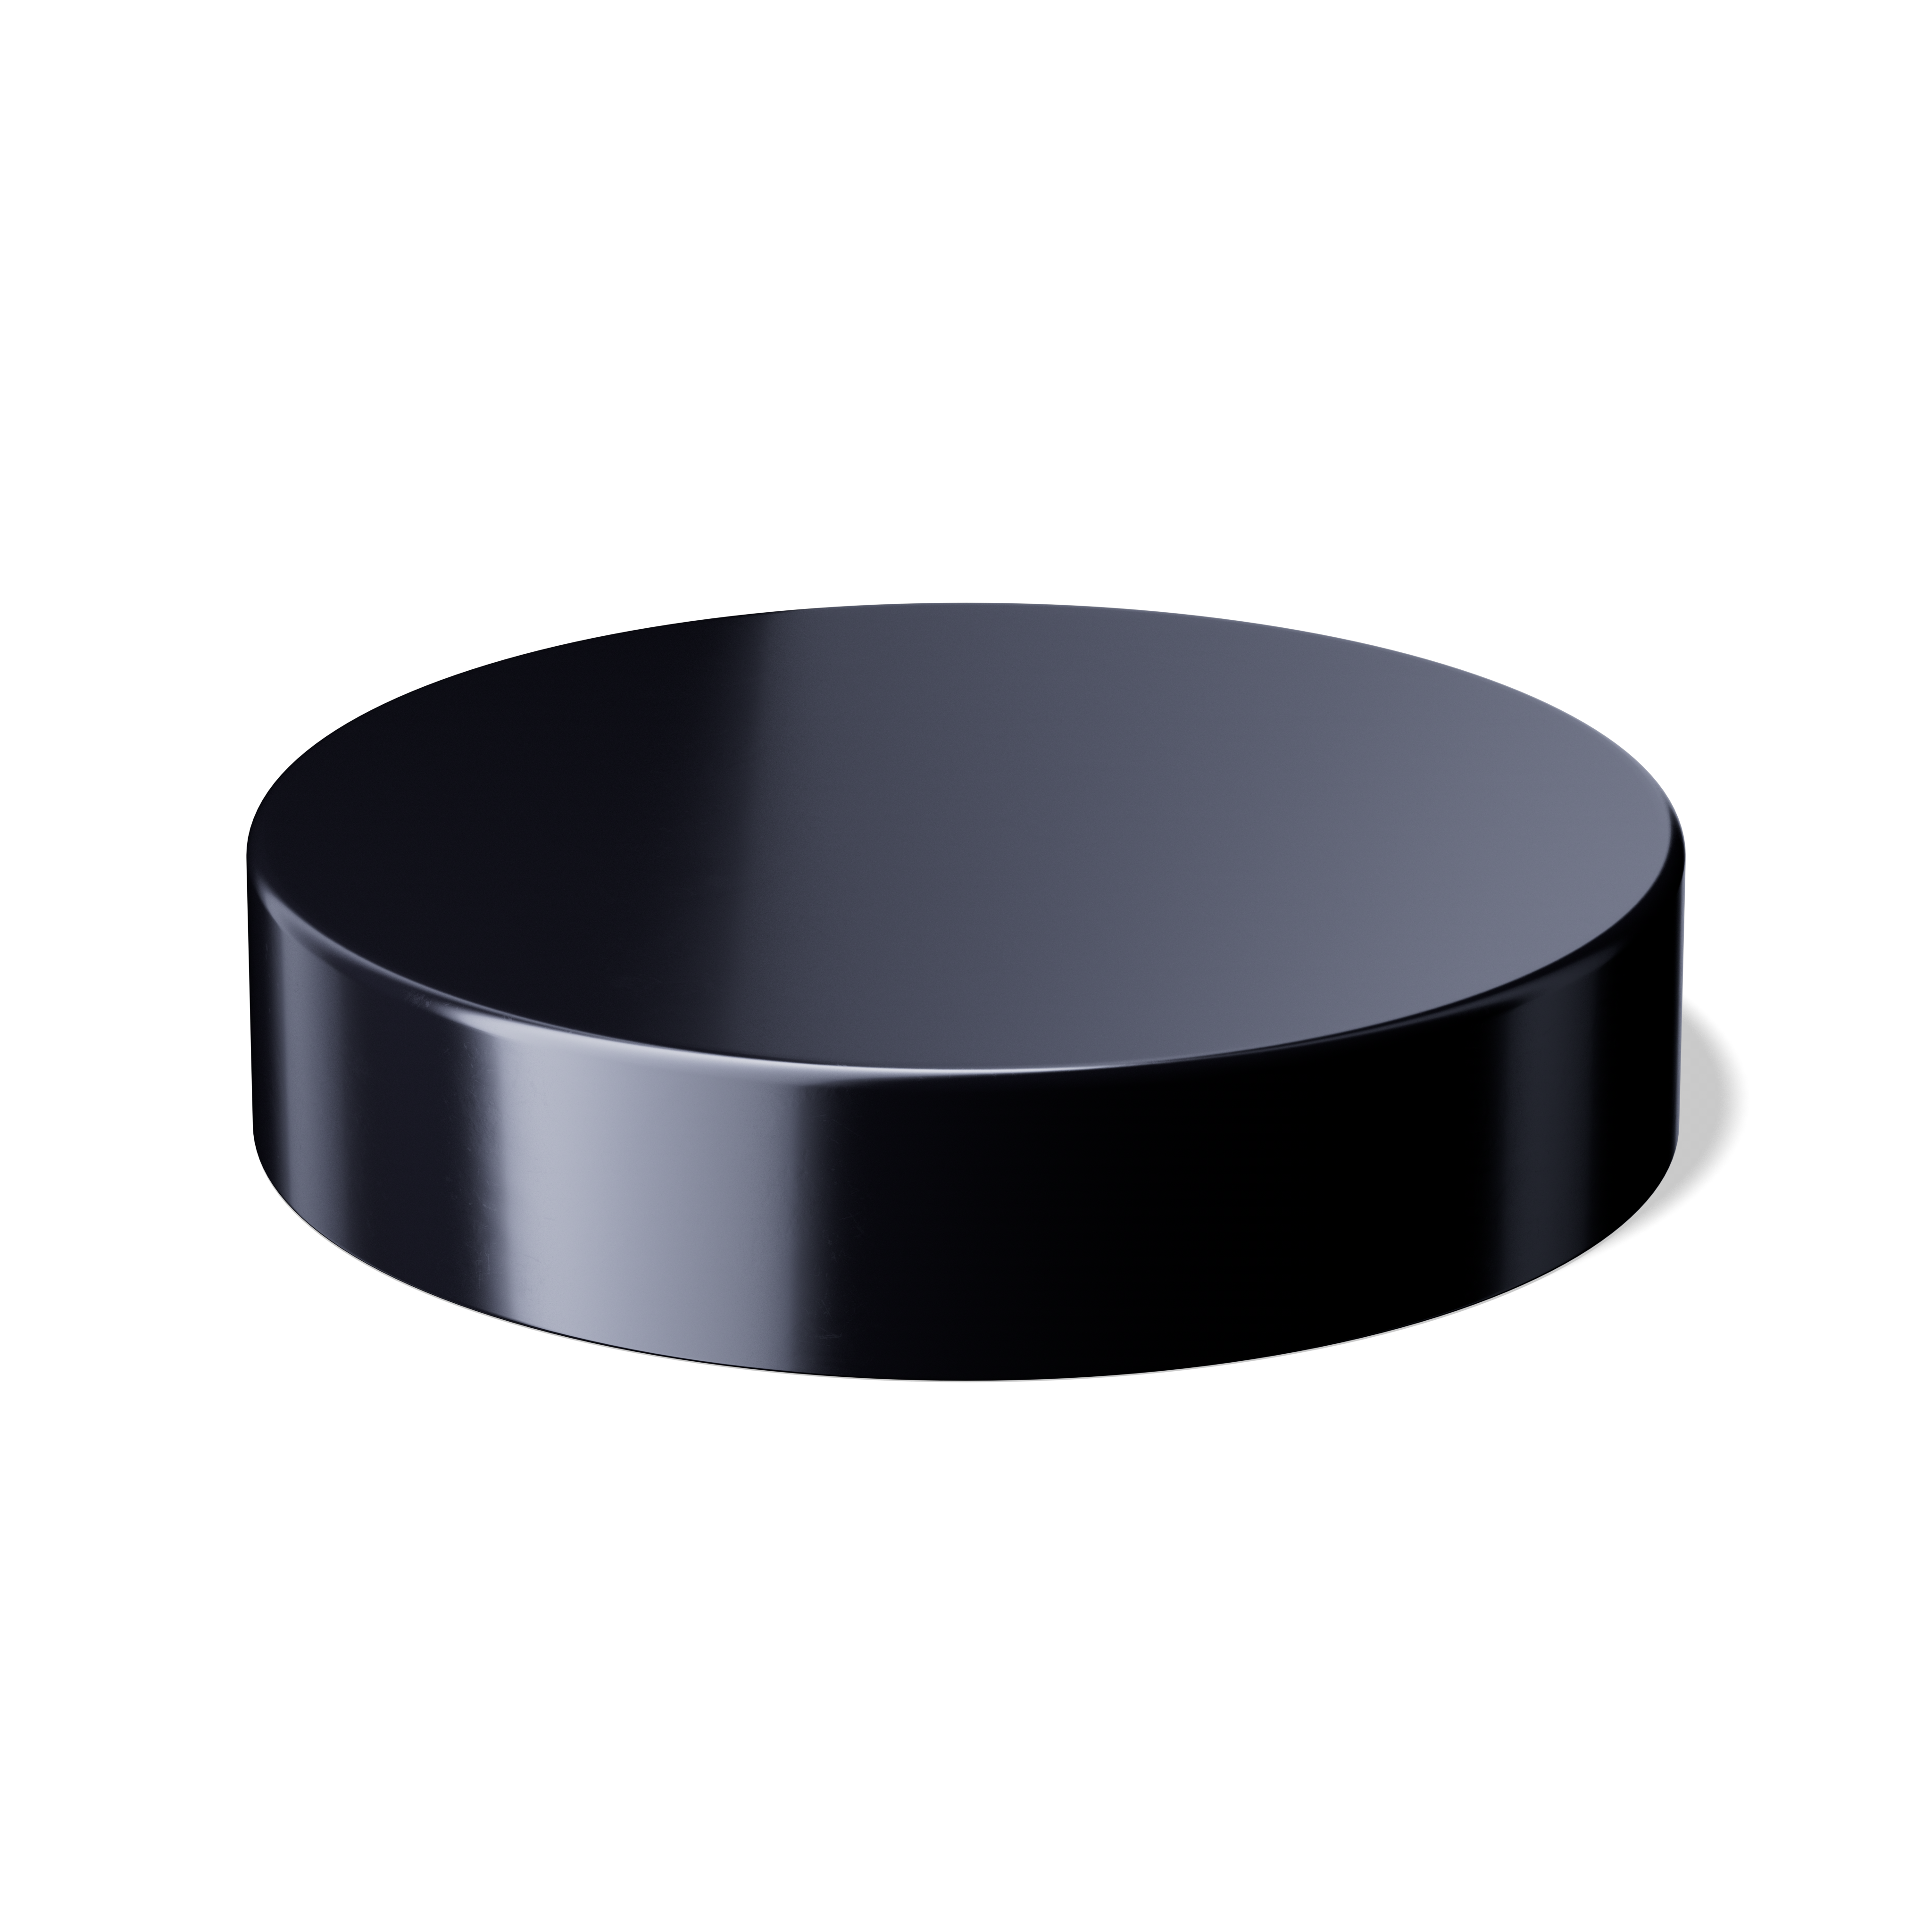 Lid child-resistant Modern 86 special, PP, black, glossy finish, violet Phan inlay (Eris 240)